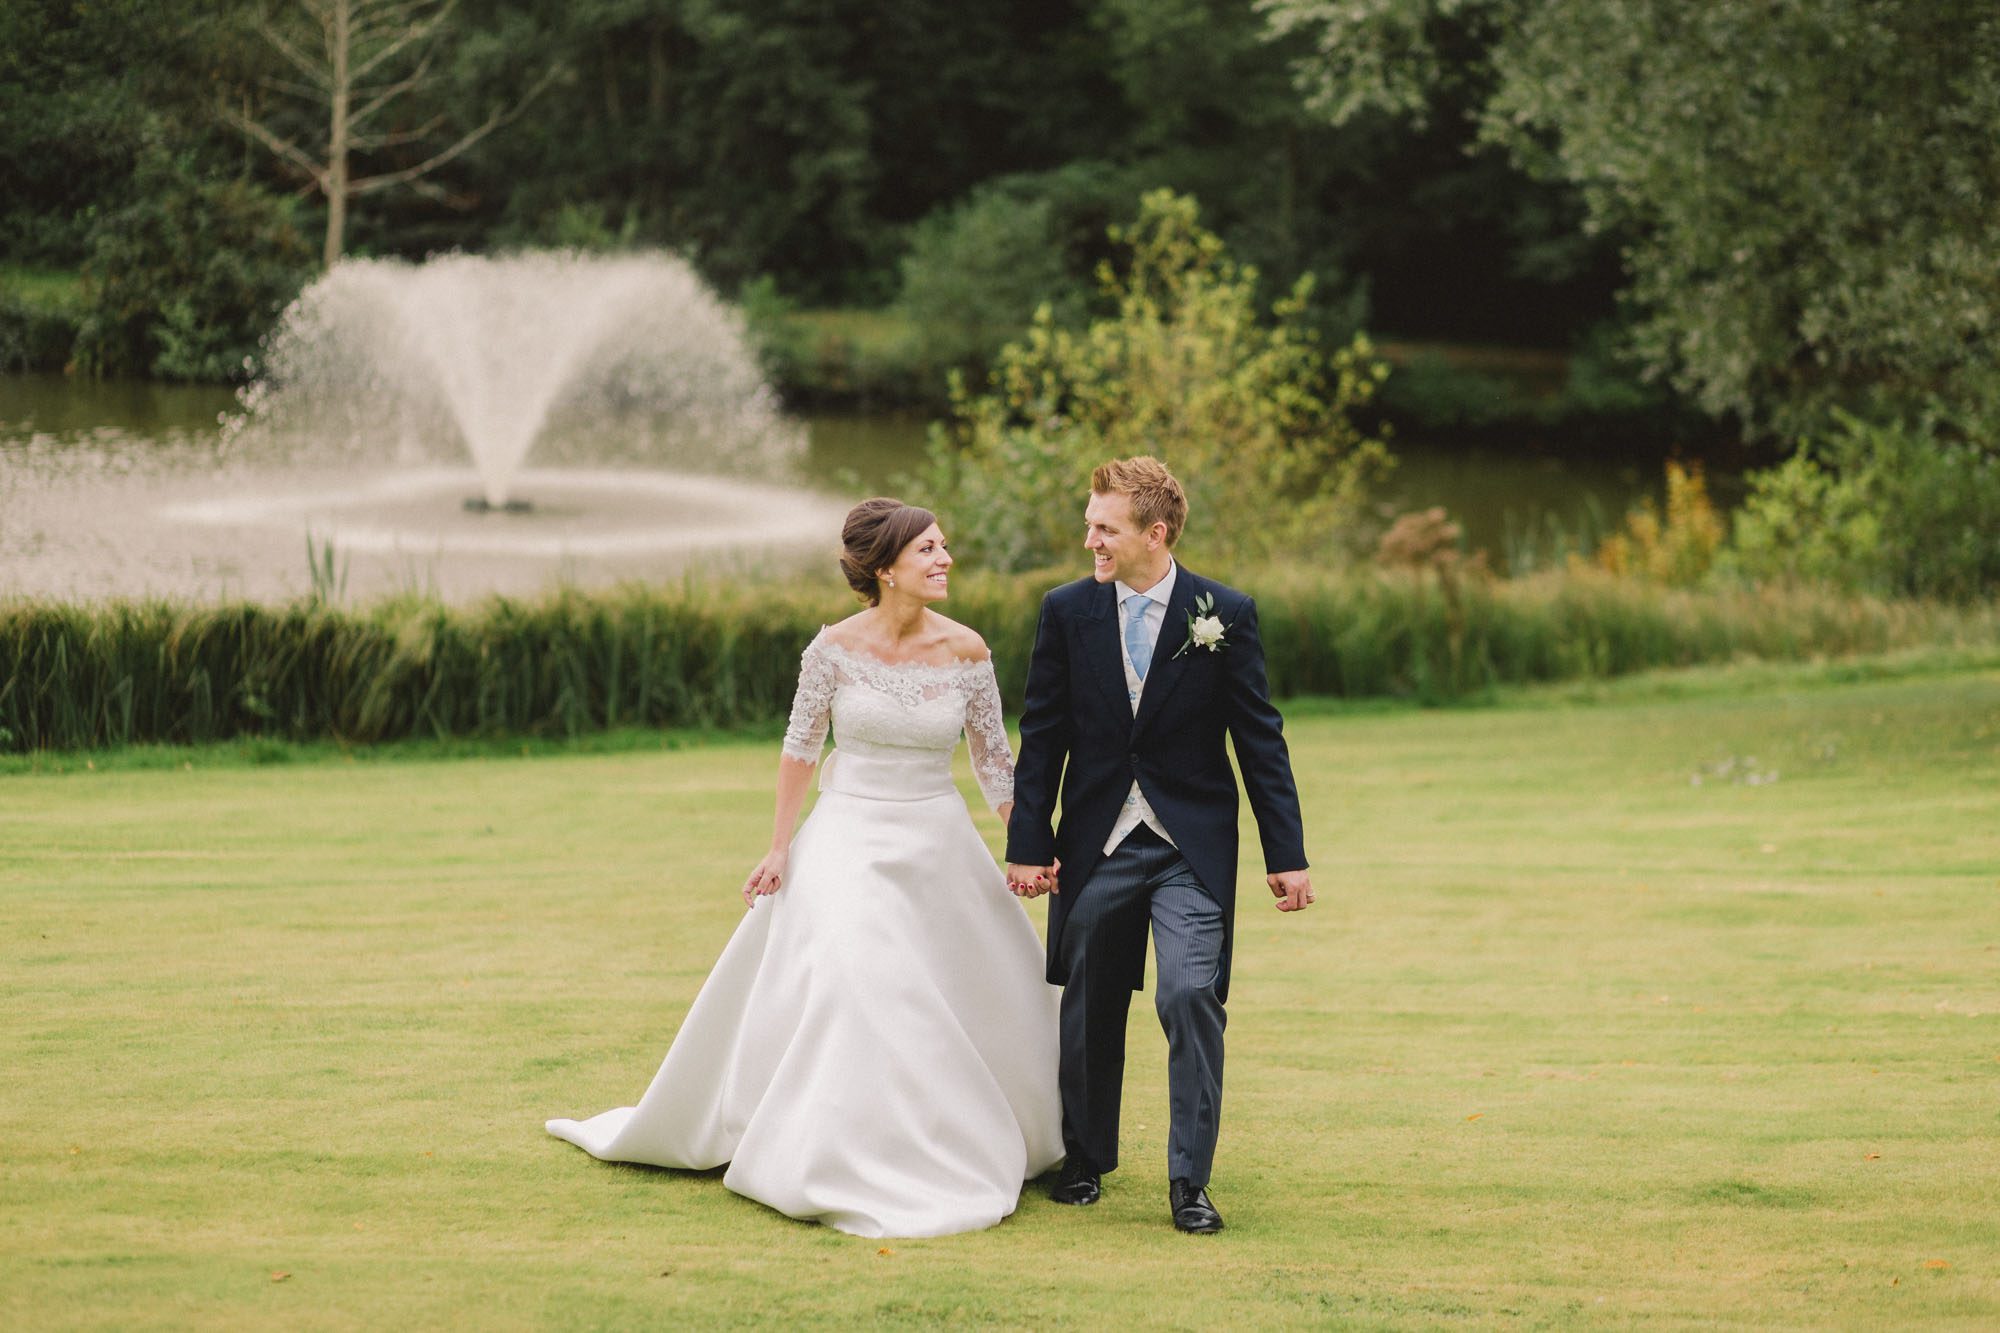 Bride and groom smiling whilst they take a stroll on their wedding day at Ashdown Park Wedding Venue in Sussex.